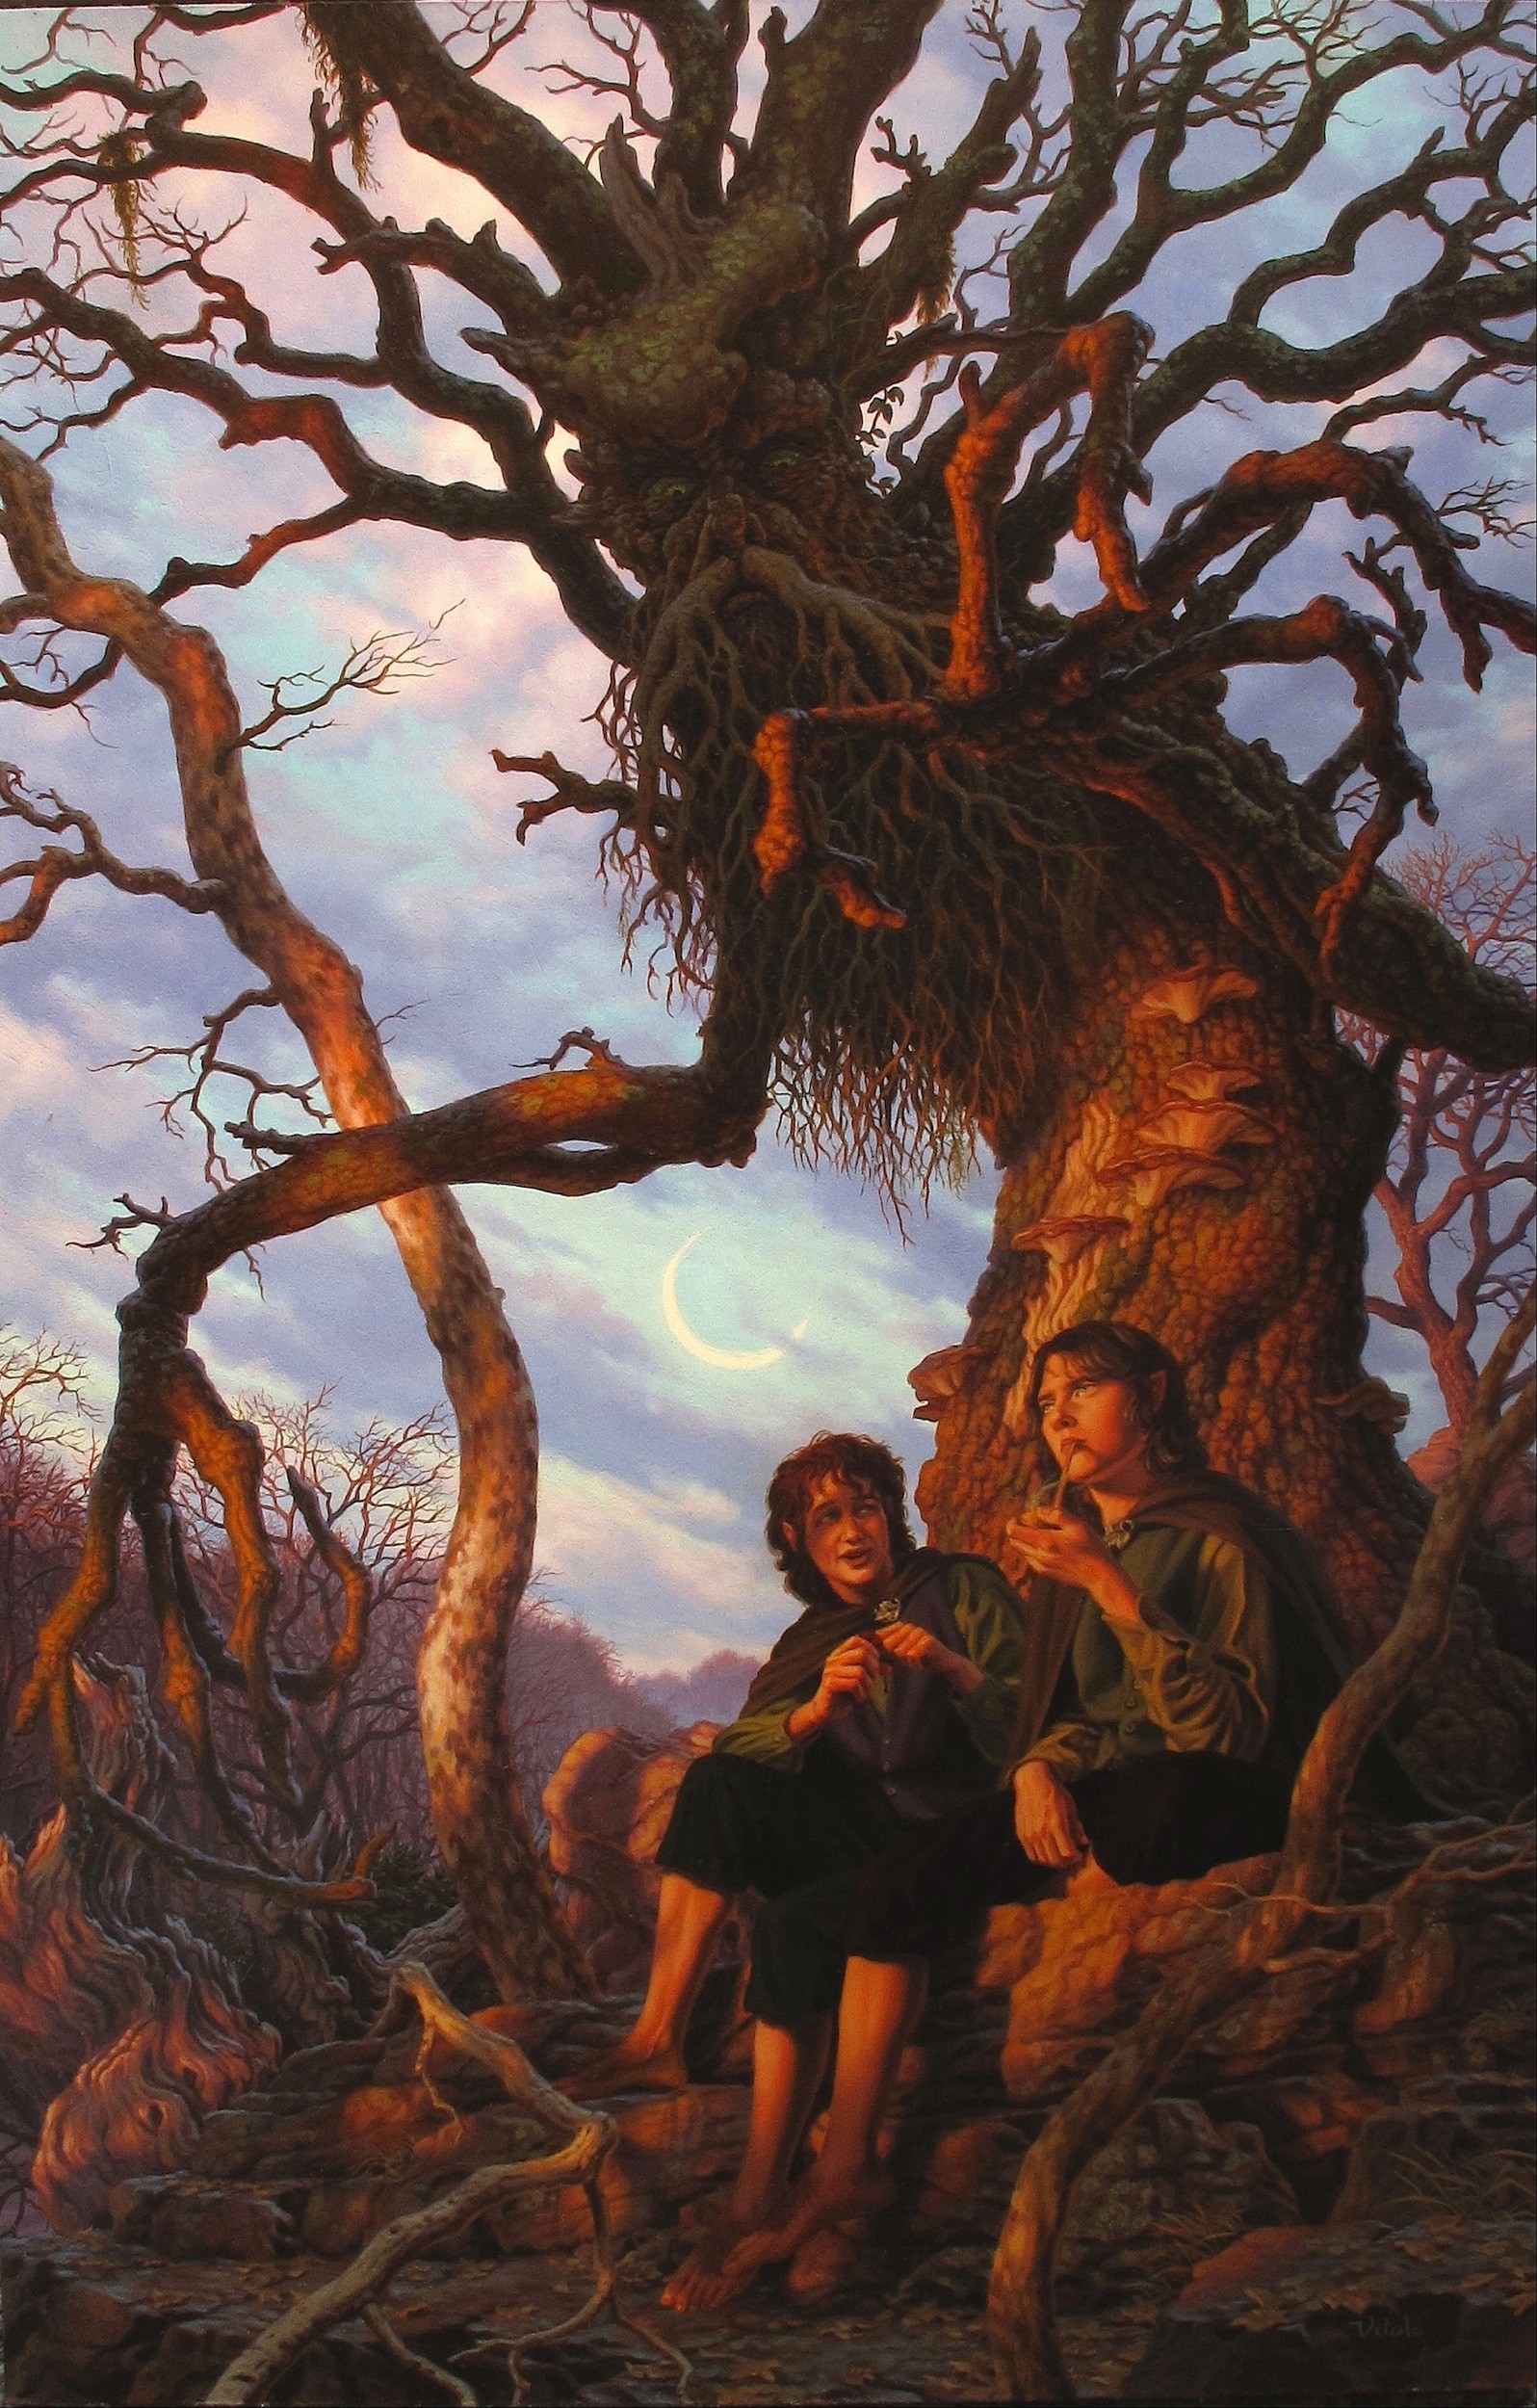 Fantasy Lord of the Rings Art by Raoul Vitale